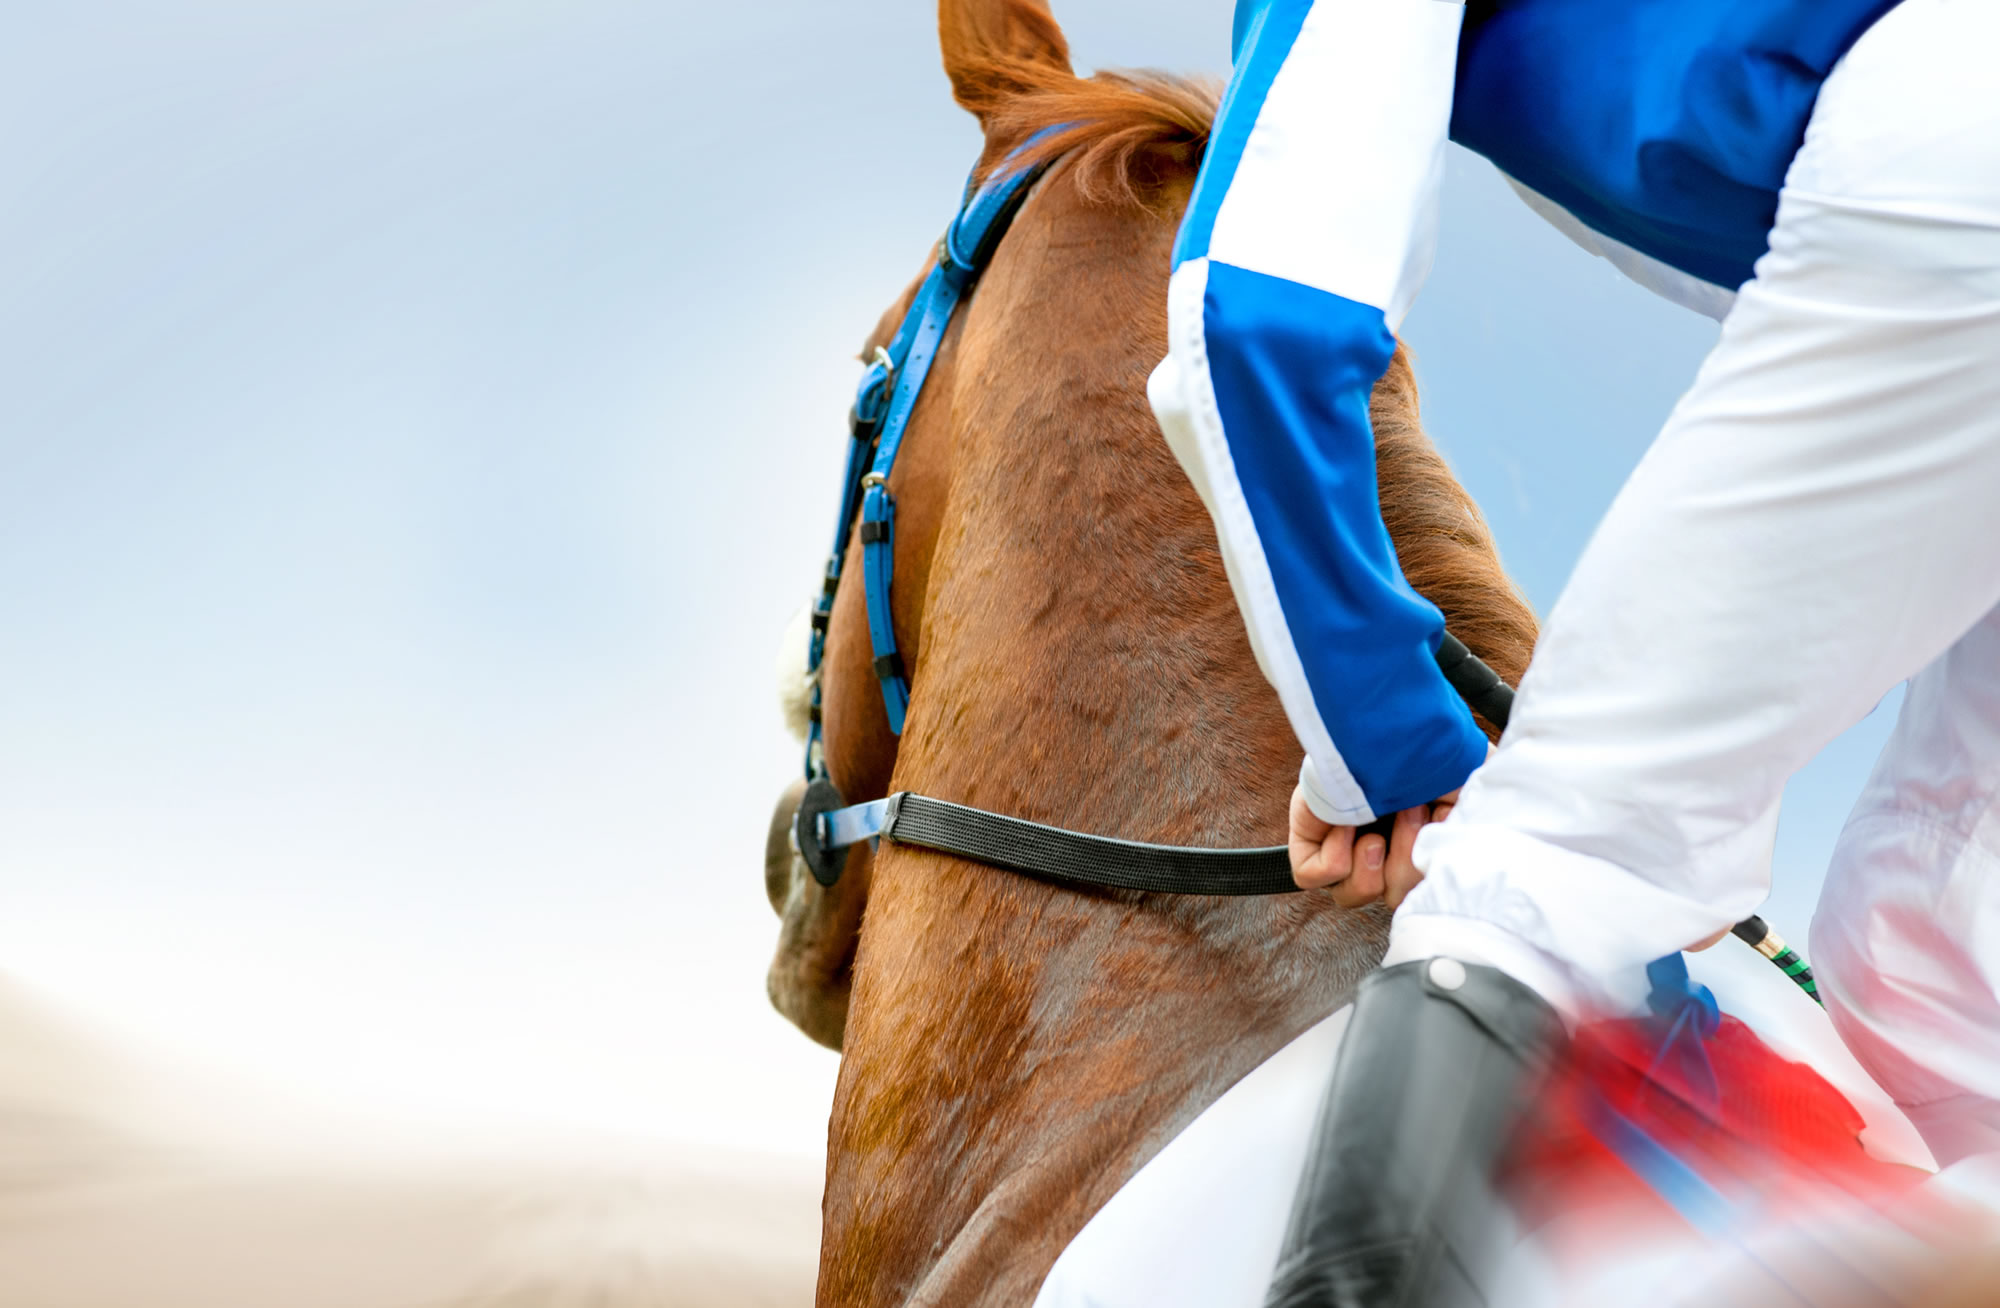 Attend the Grand National Horse Race